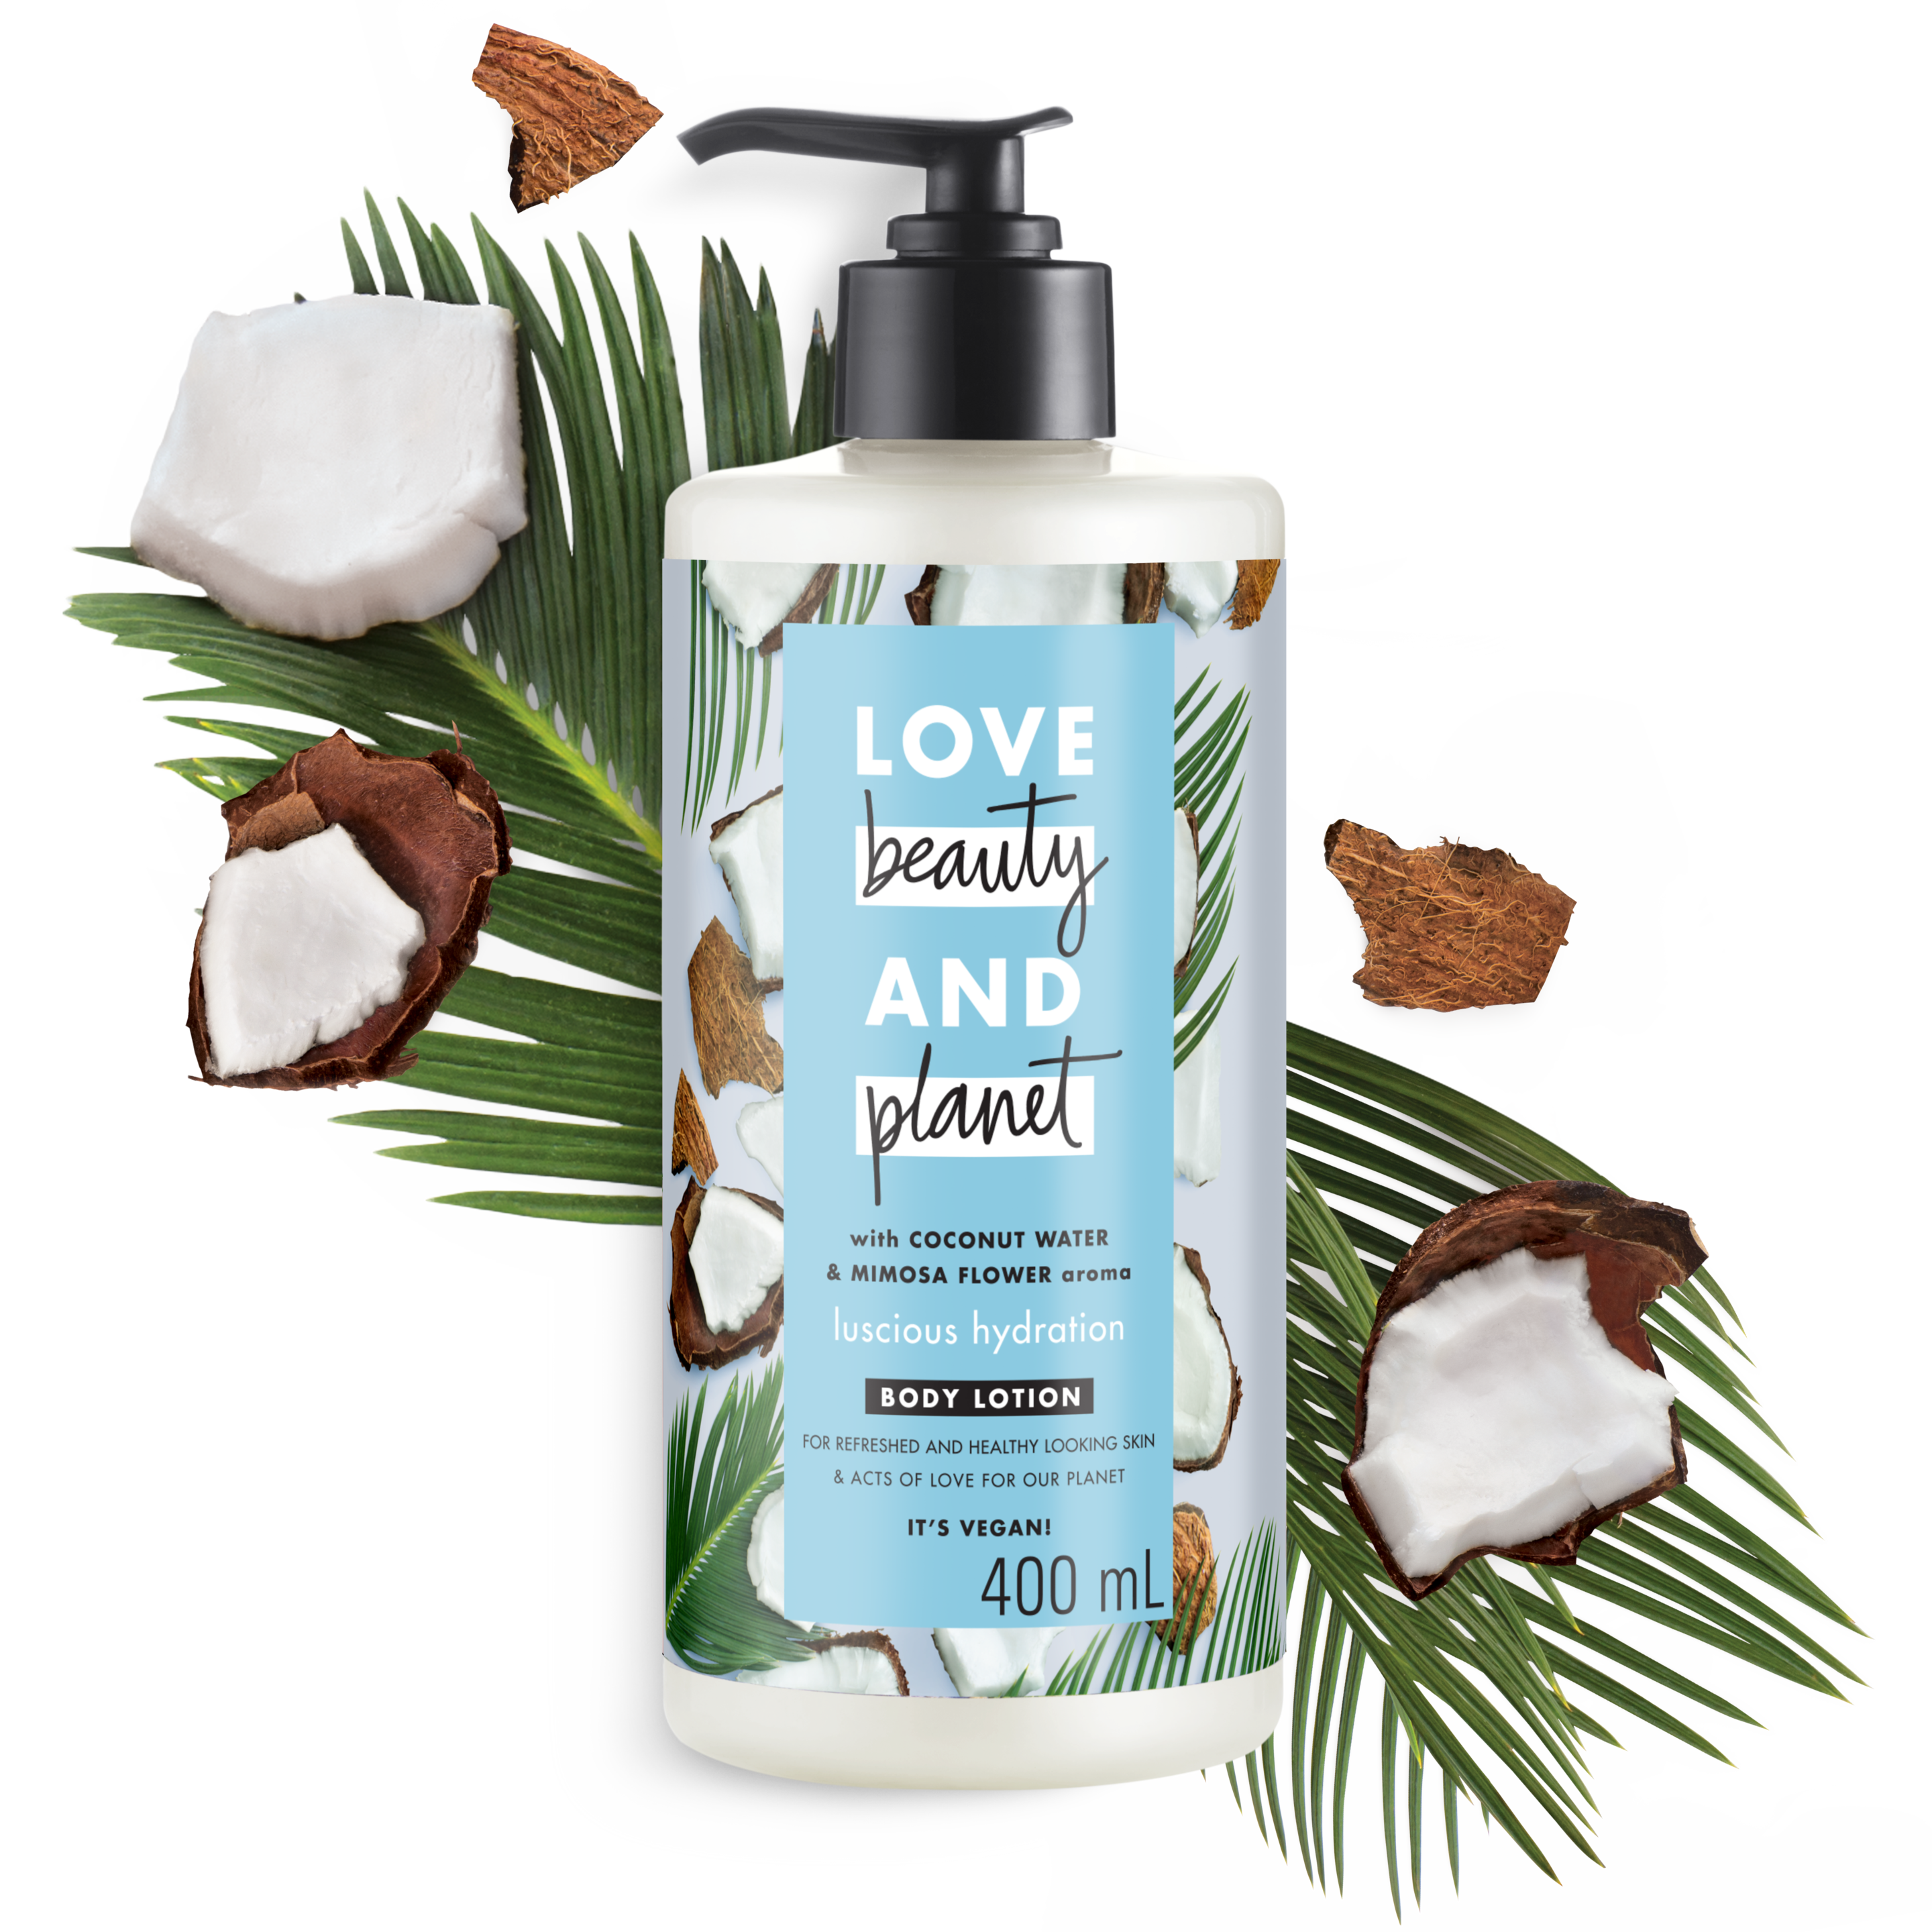 Coconut Water & Mimosa Flower Body Lotion | Love Beauty and Planet